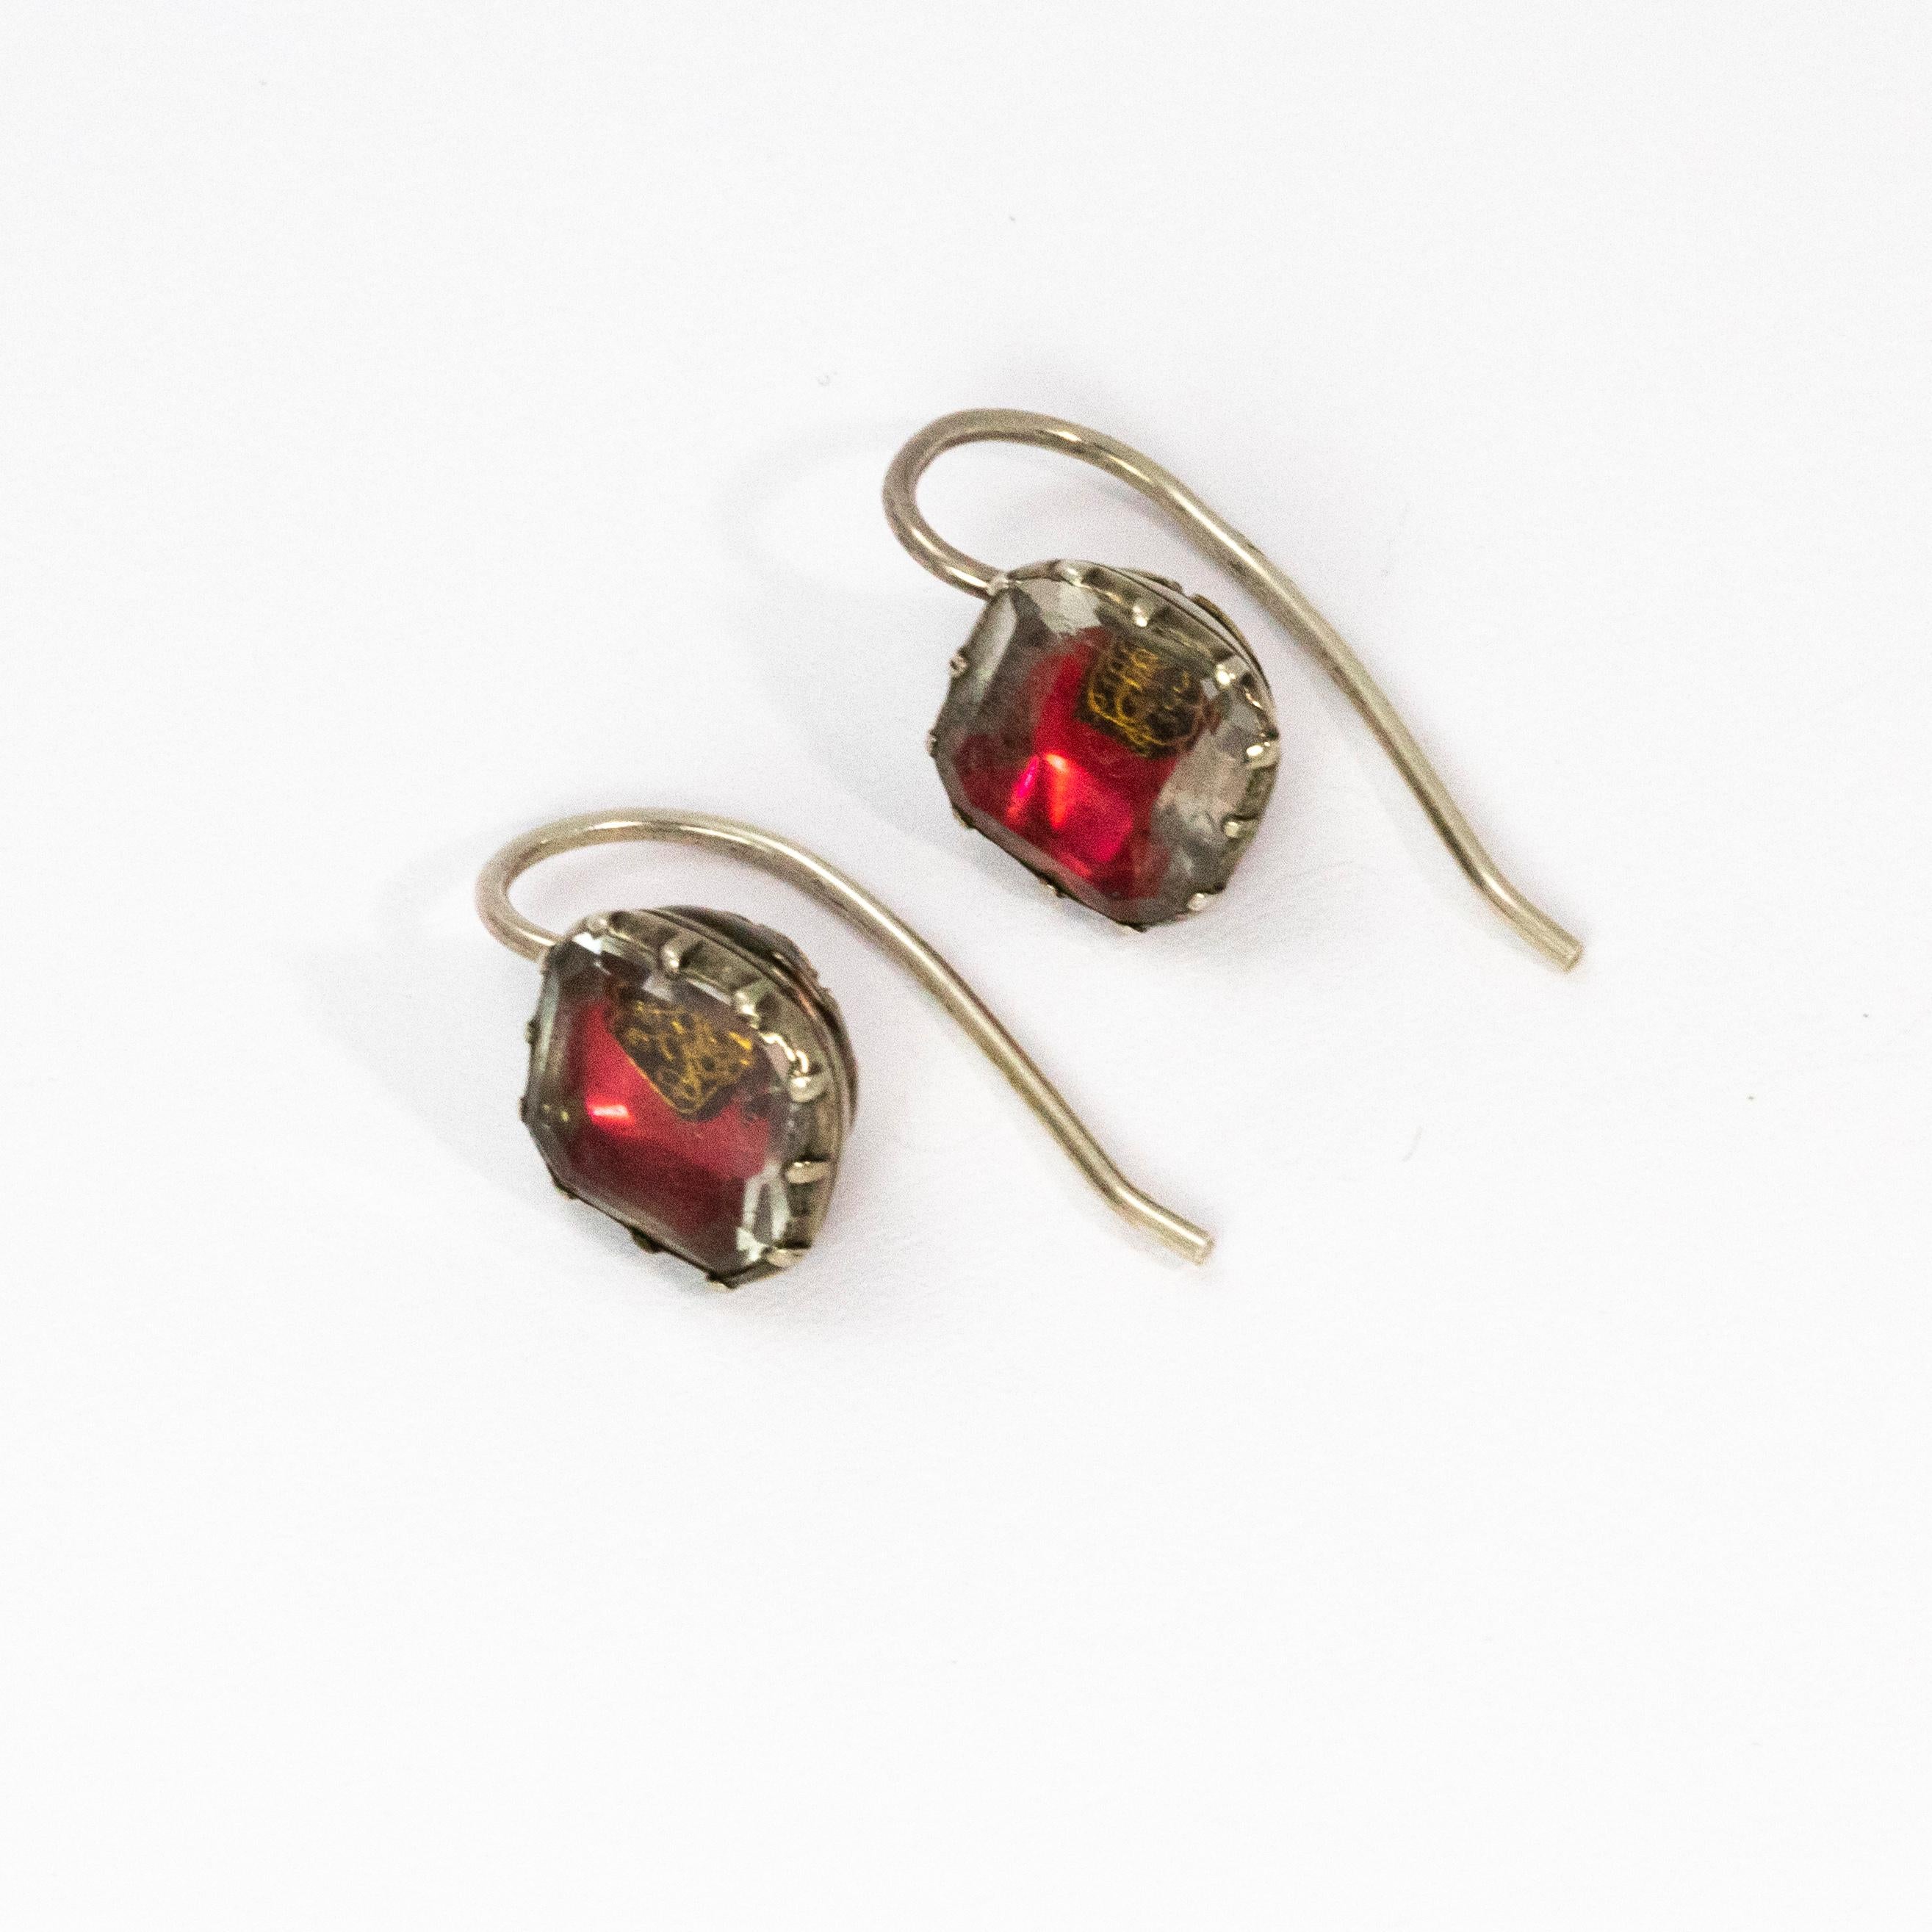 An incredible pair of Stuart crystal earrings from an iconic period of the English monarchy. Mounted in silver with classic gold wirework designs and red foil beneath the beautiful crystal. With Shepherds hook backs.

Crafted between 1650 and 1730,